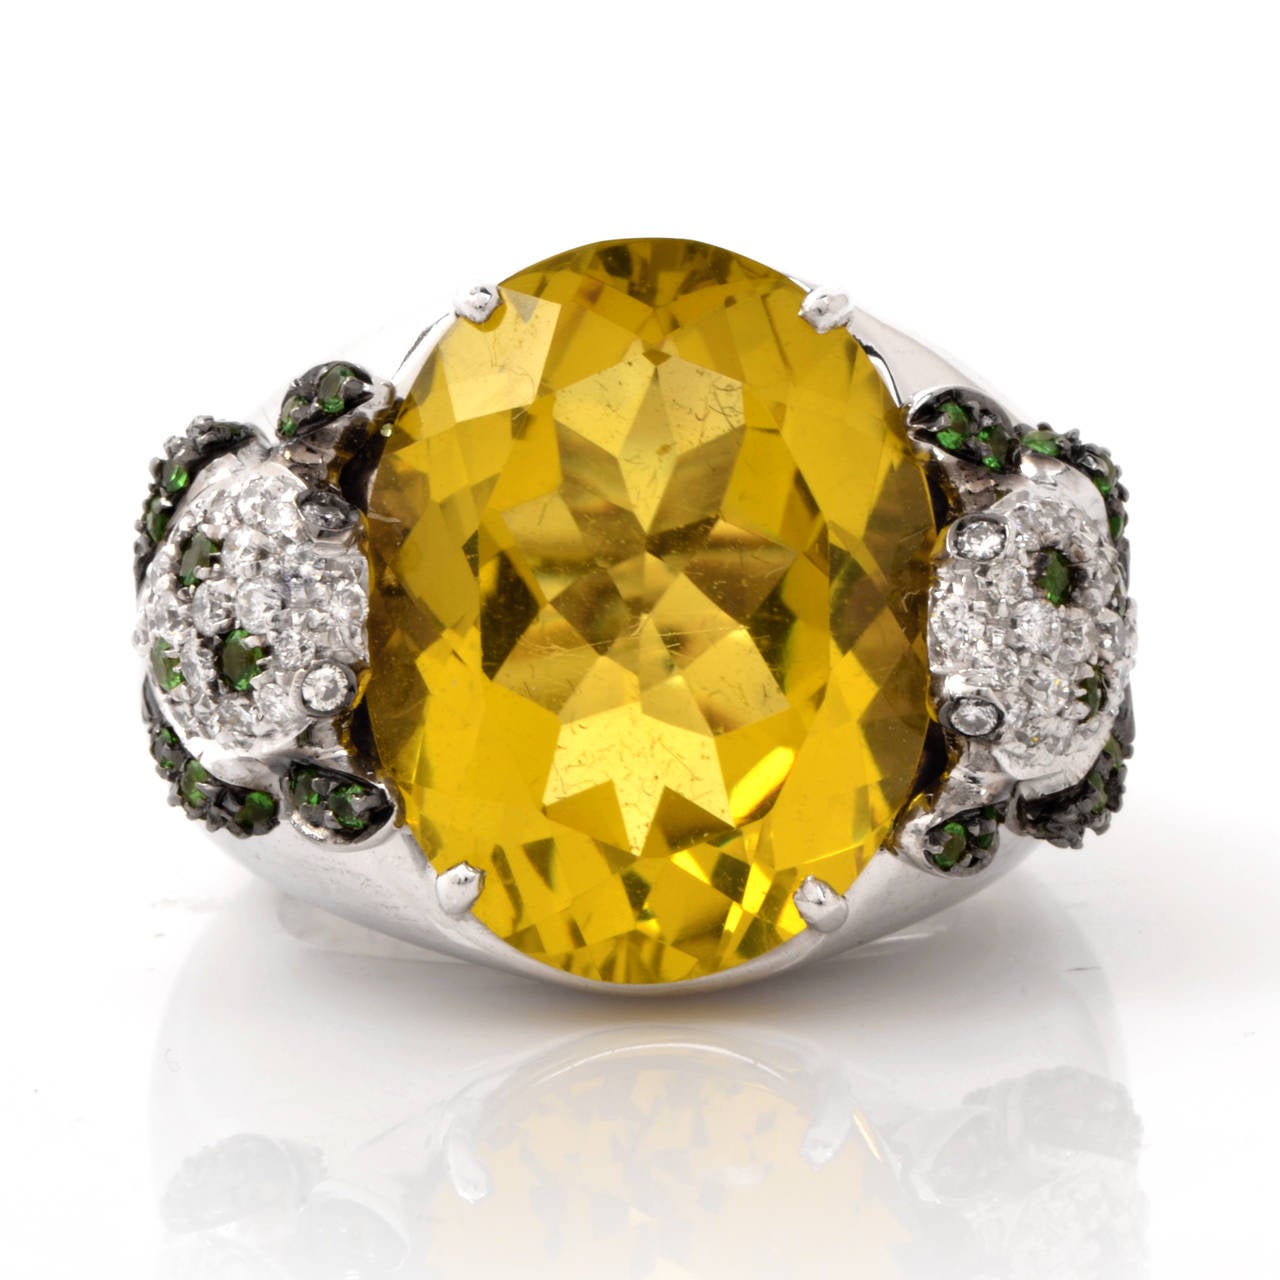 This  estate  Designer Valente Milano  cocktail ring is of Italian provenance, crafted in solid 18K white gold.  Vividly colored and classically elegant in aesthetic, this  alluring Italian ring is centered with an eye-catching   oval-faceted  lemon